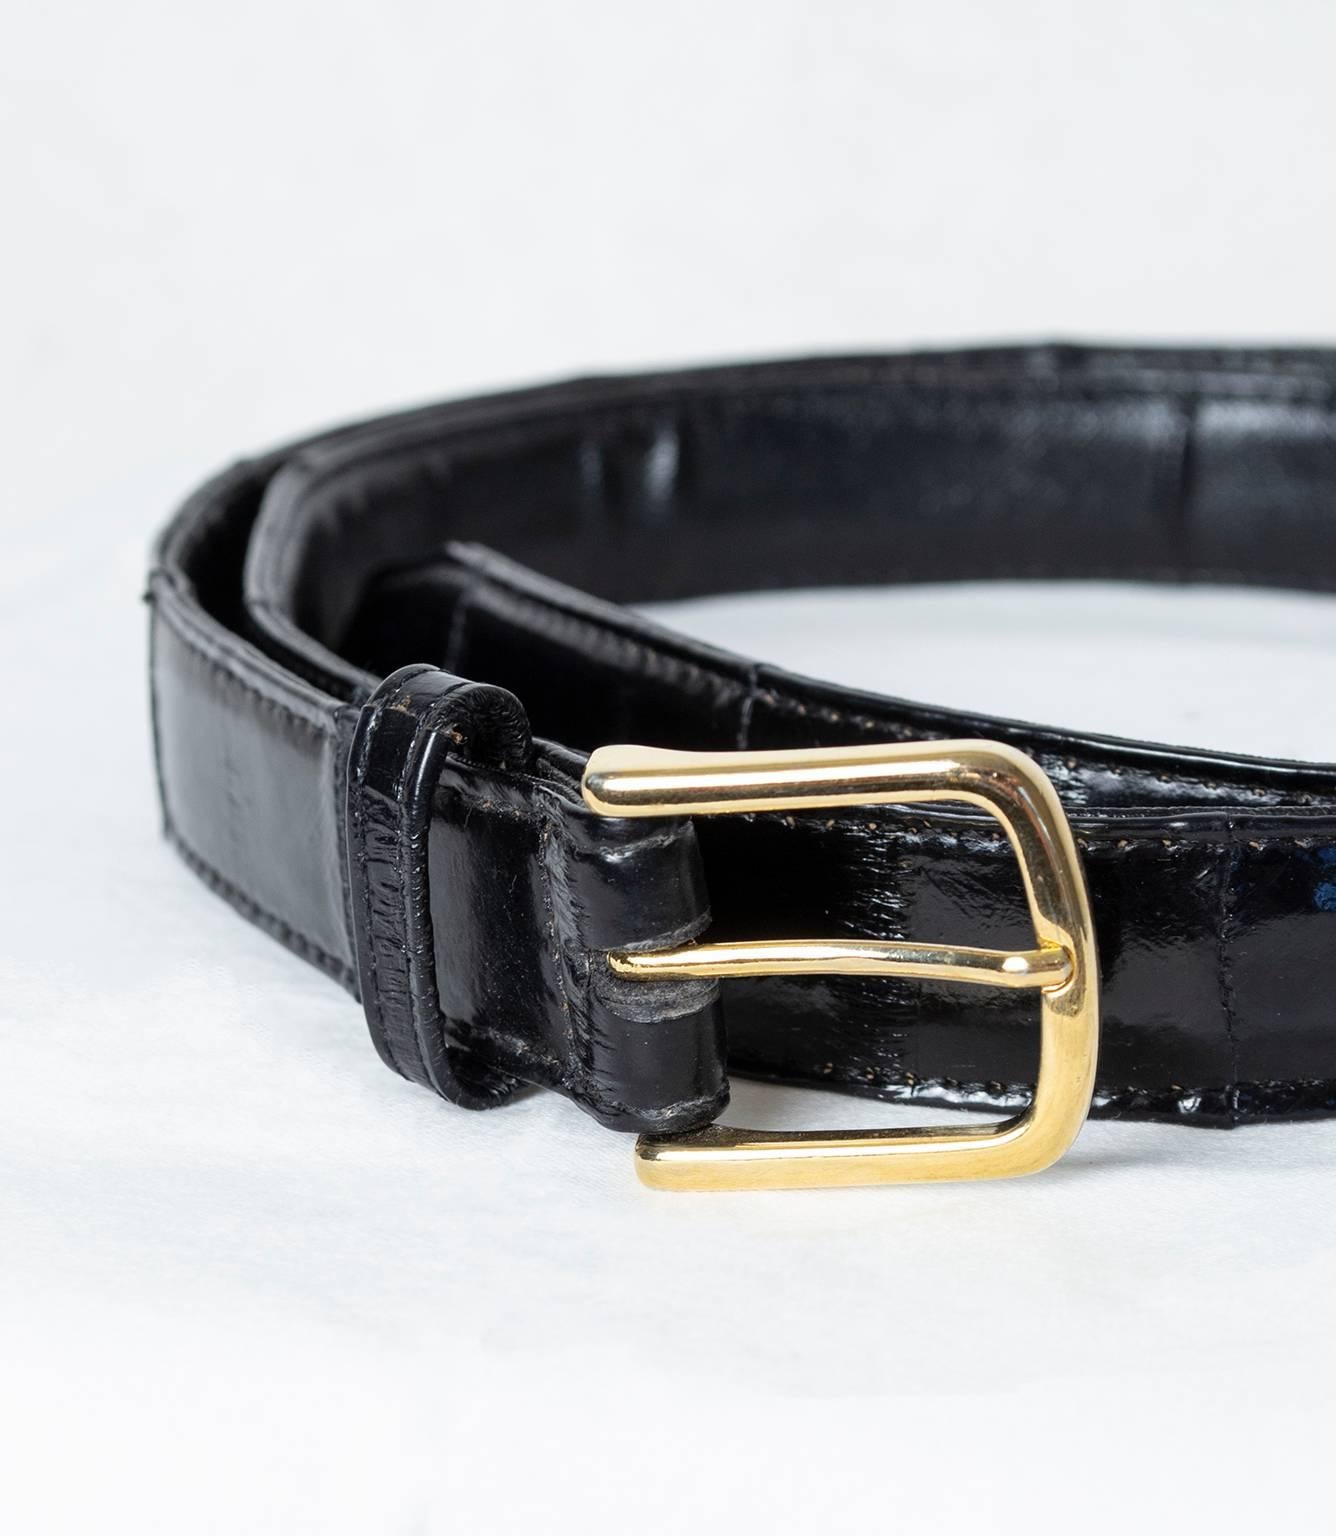 A sophisticated alternative to alligator, quality eelskin has the same shine and luster as its reptilian counterpart, but a less textured relief. In basic black with an understated slim gold buckle, this one lets the unique leather do all the